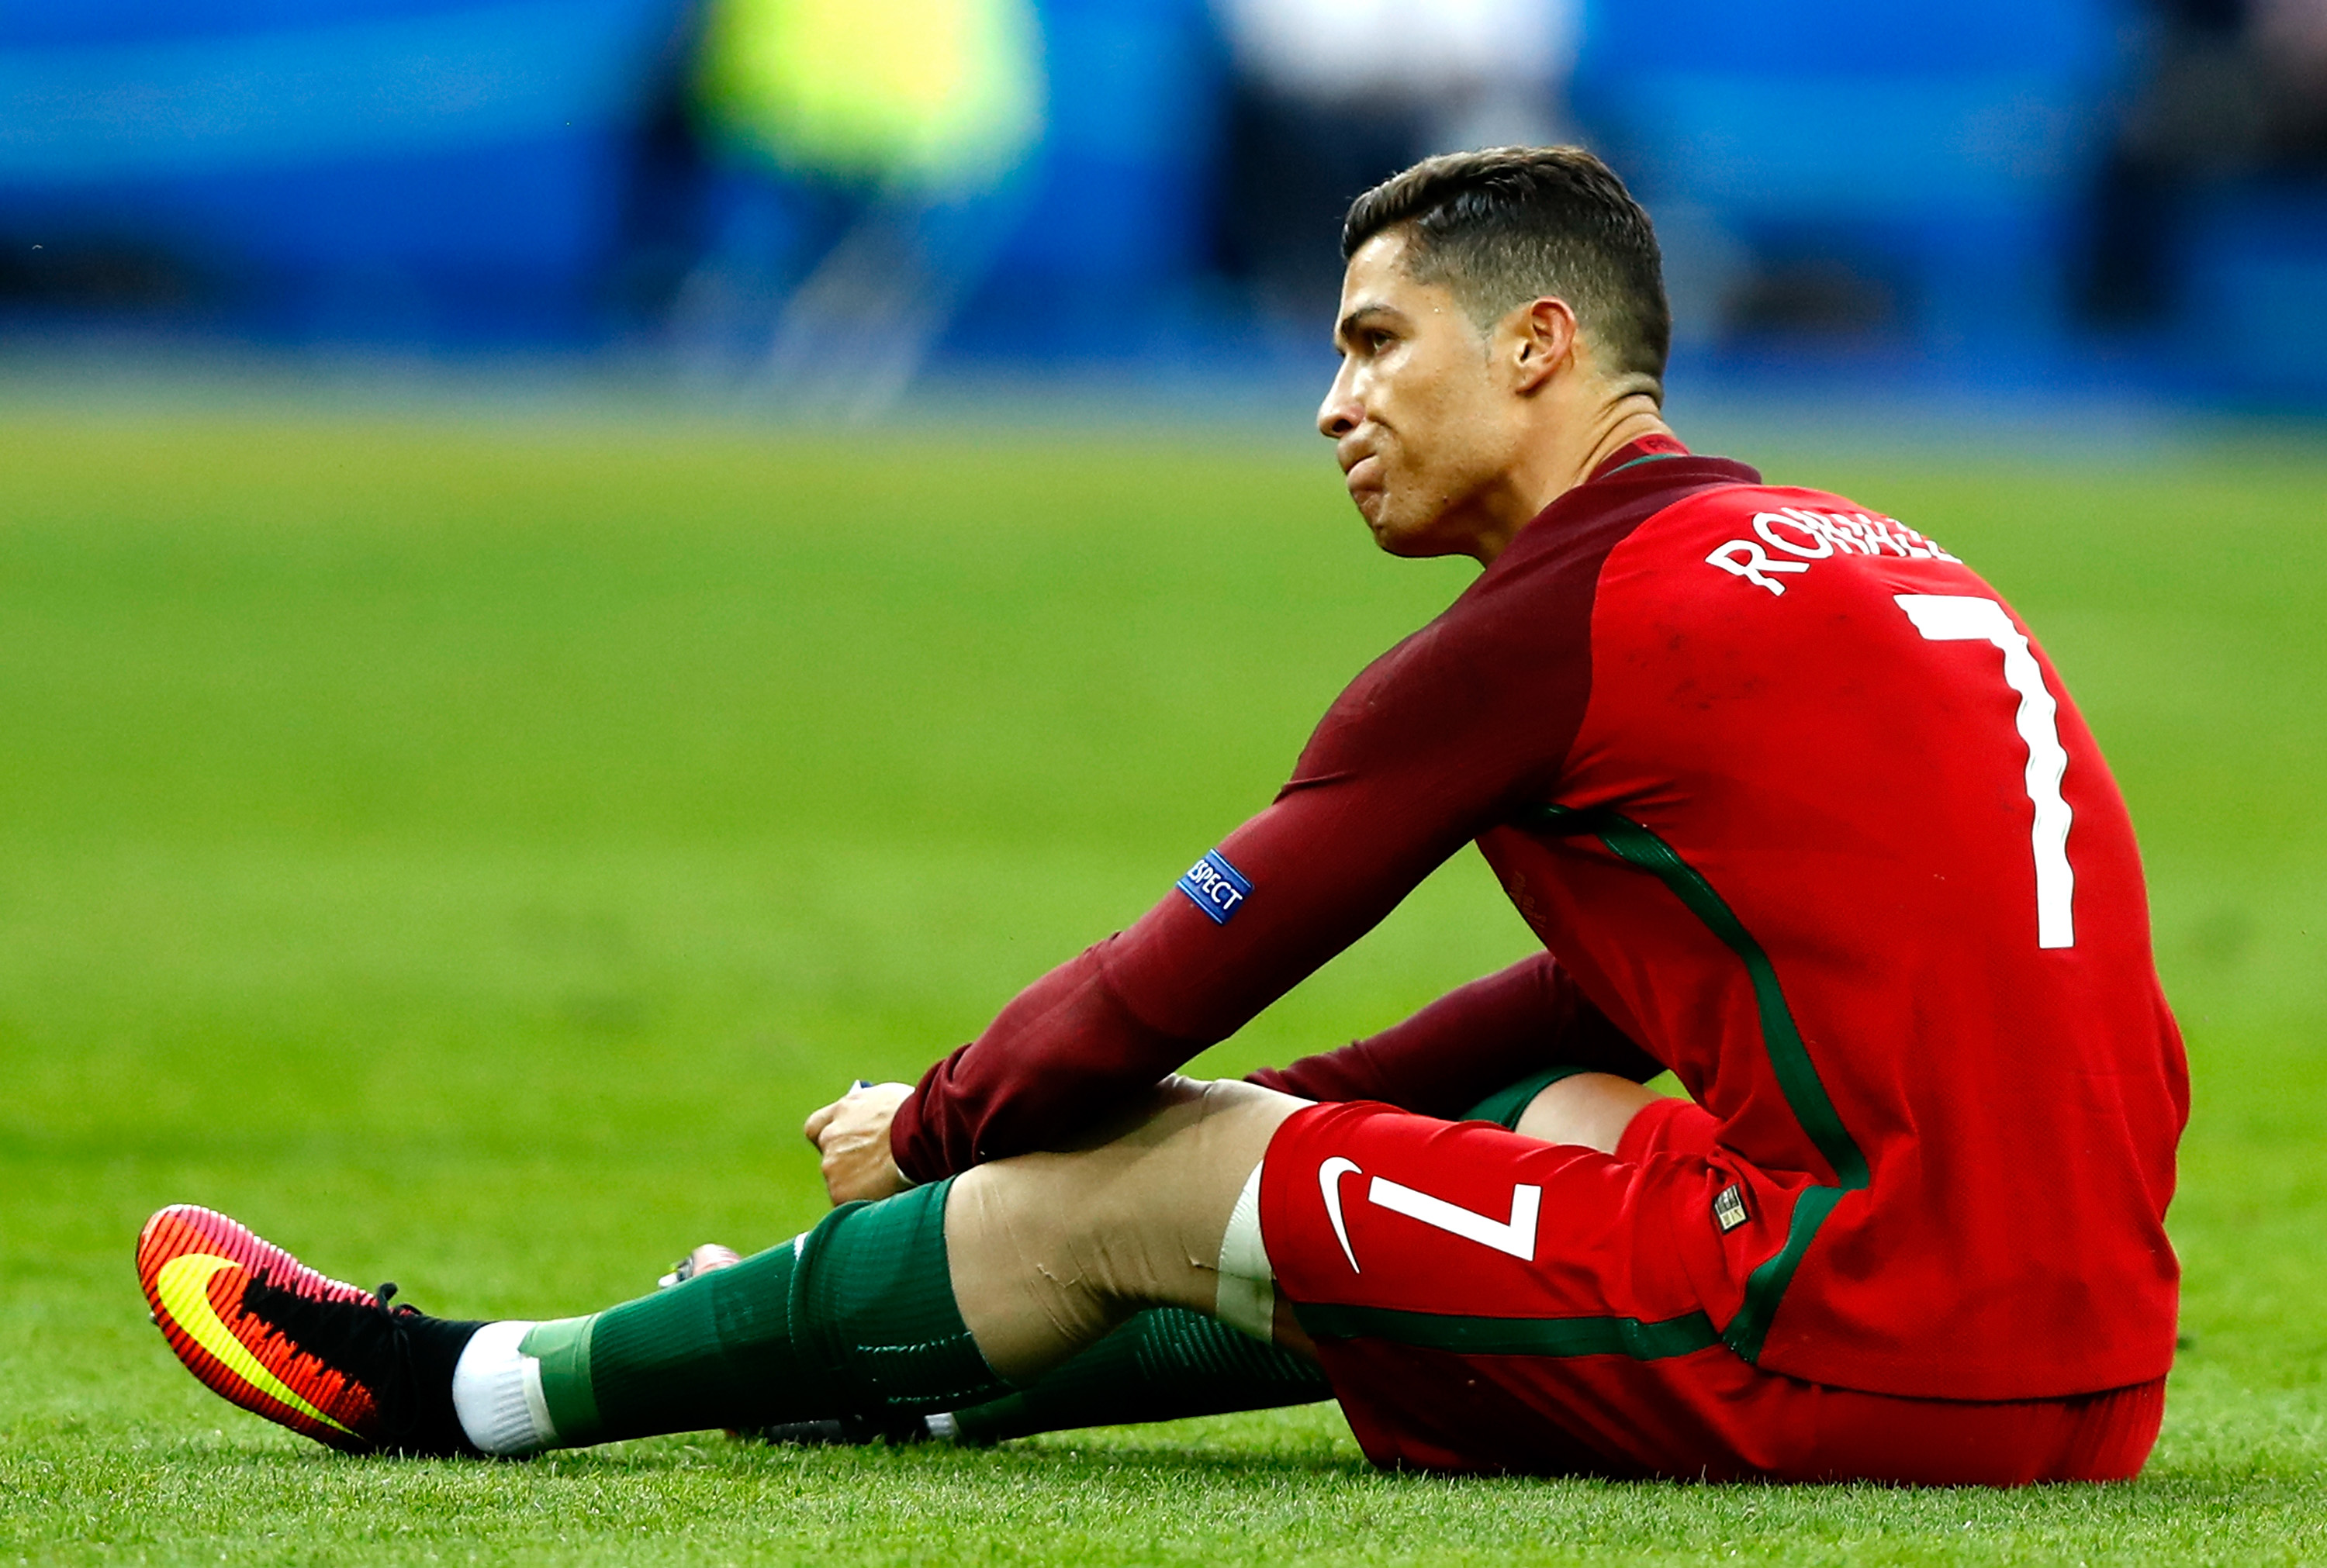 PARIS, FRANCE - JULY 10:  Cristiano Ronaldo of Portugal shows his emotion before being substituted due to injury during the UEFA EURO 2016 Final match between Portugal and France at Stade de France on July 10, 2016 in Paris, France.  (Photo by Clive Rose/Getty Images)